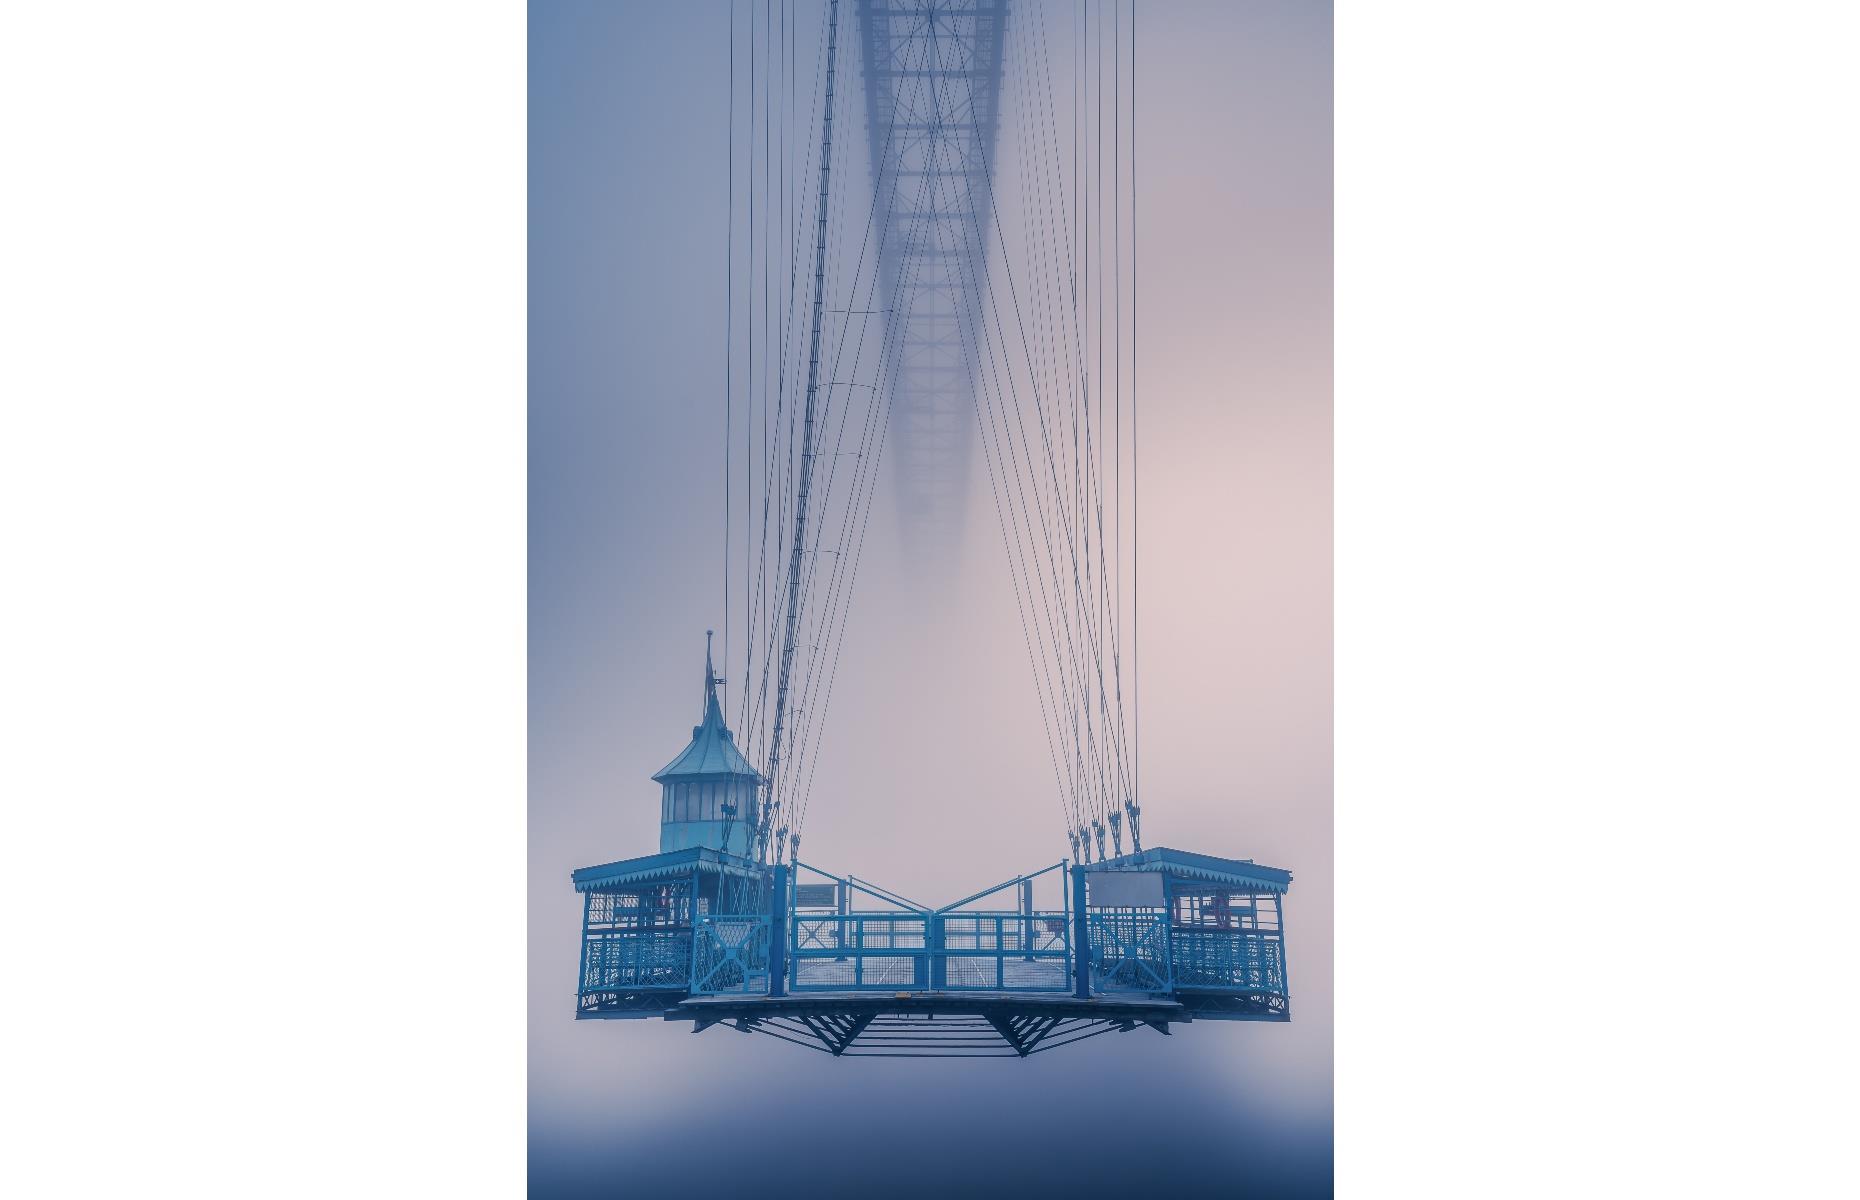 <p>One of just six operational transporter bridges left in the world, Newport Transporter Bridge is essentially a suspended ferry, with a boom that allows ships to pass underneath, and a railway track on which a moving carriage operates. The landmark, which first opened in 1906, is shown in a new light in this stunning image by Itay Kaplan, which was shot during early-morning fog just after sunrise. </p>  <p><a href="https://www.facebook.com/loveexploringUK?utm_source=msn&utm_medium=social&utm_campaign=front"><strong>Love this? Follow us on Facebook for more travel inspiration</strong></a></p>